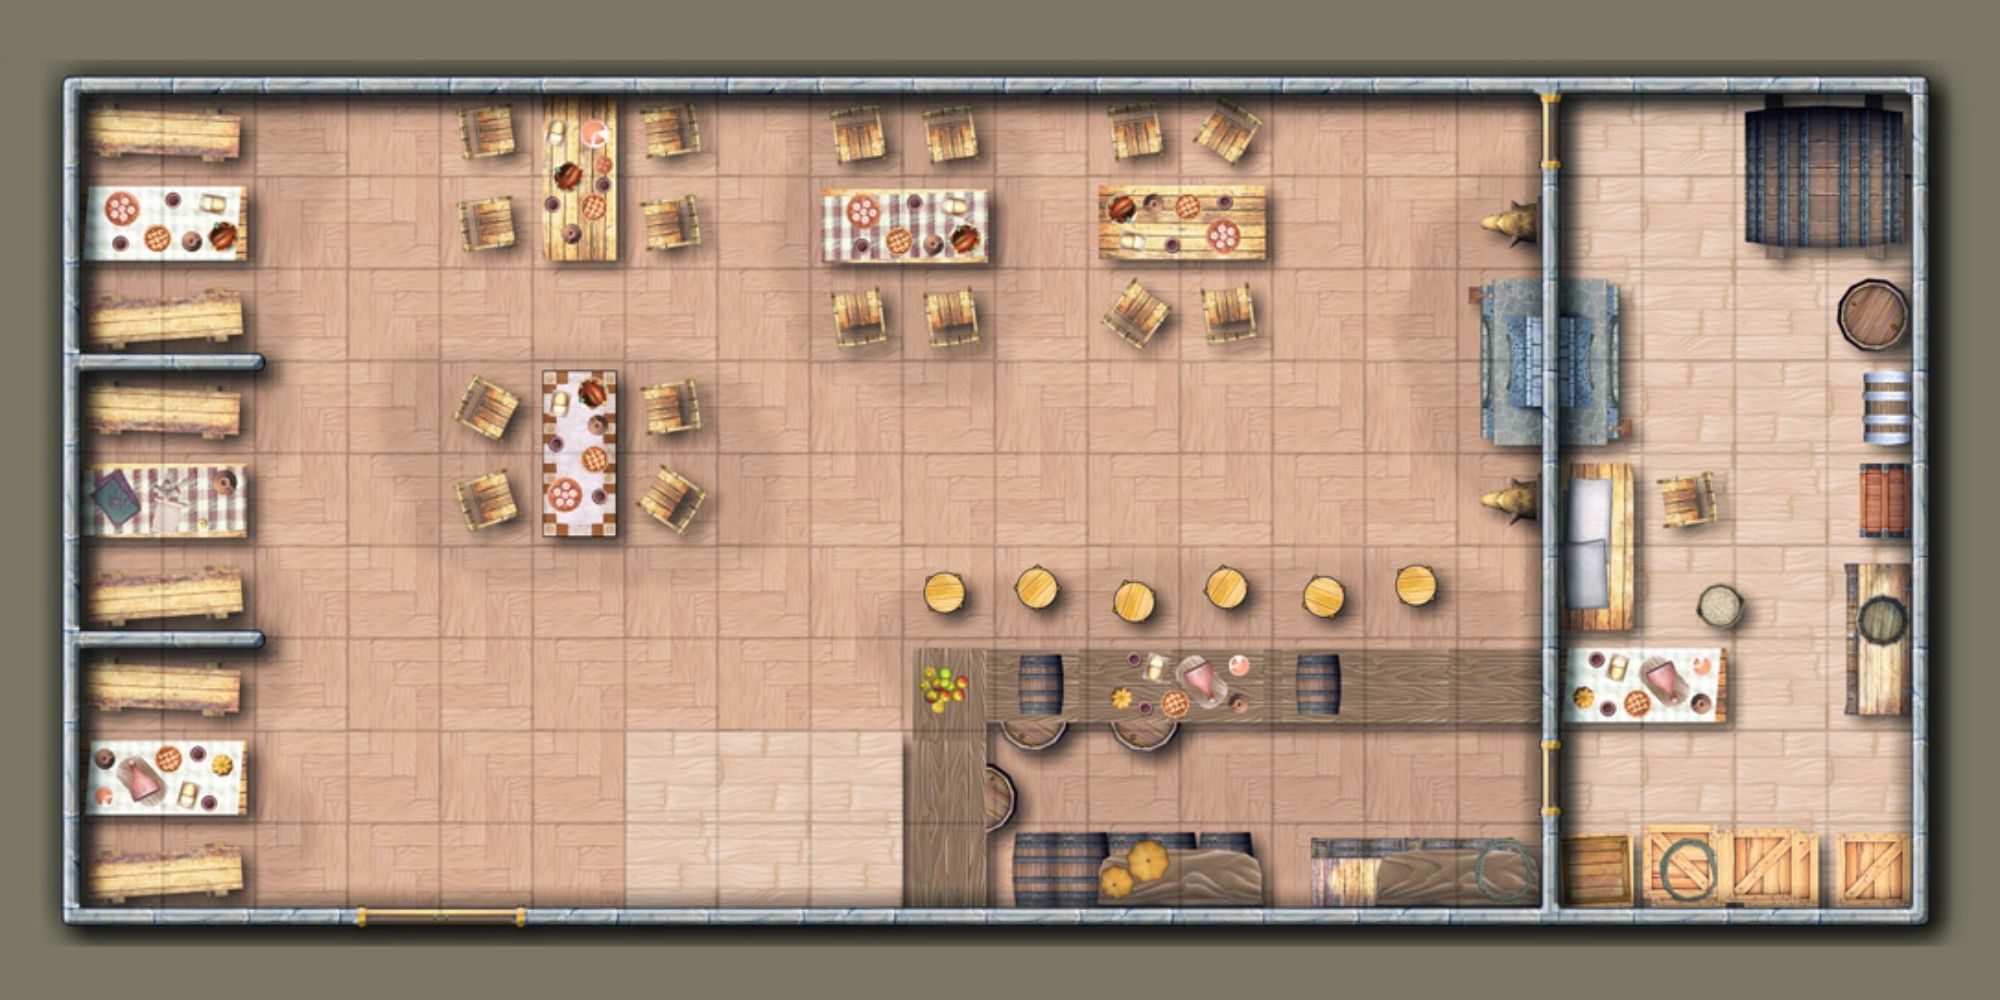 Square map showing the interior of what appears to be a tavern complete with kitchen and many tables